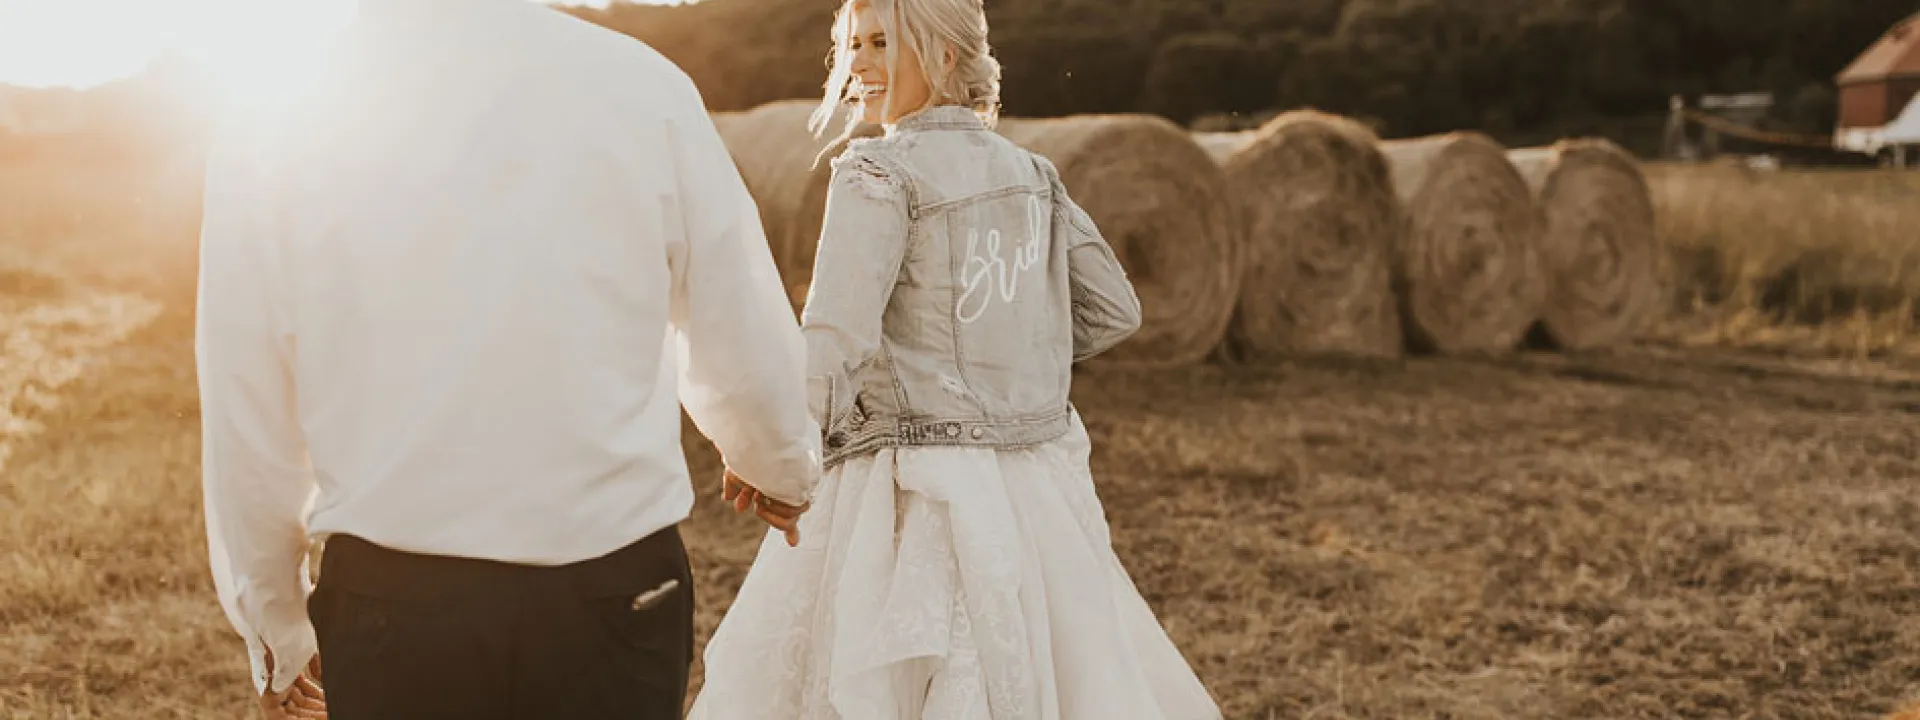 The bride shows her down-home style in a distressed and embellished bridal jean jacket.